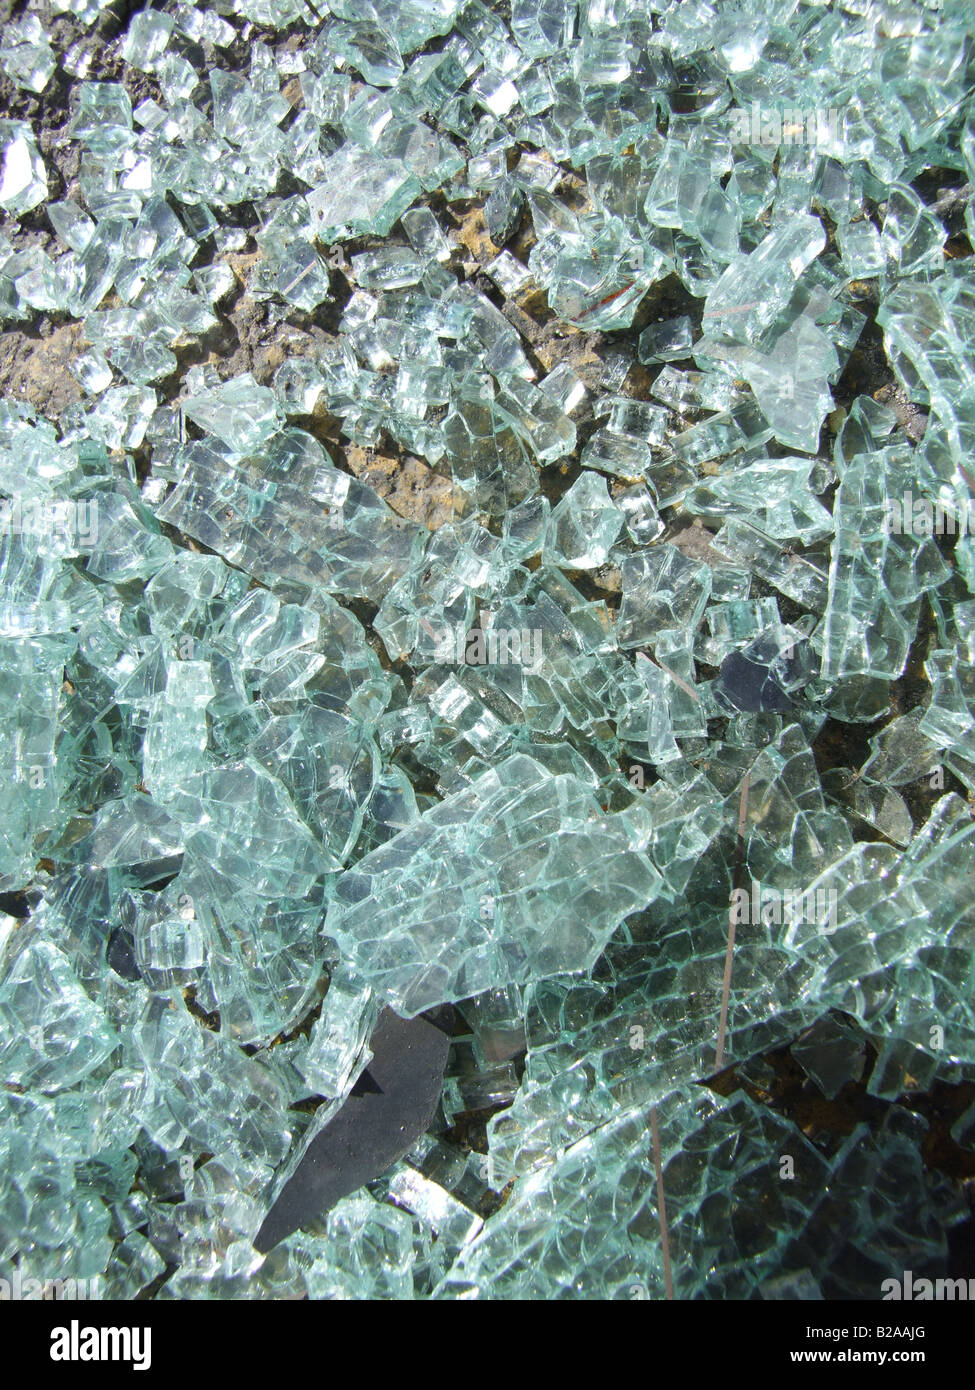 glass from smashed car window on road surface Stock Photo